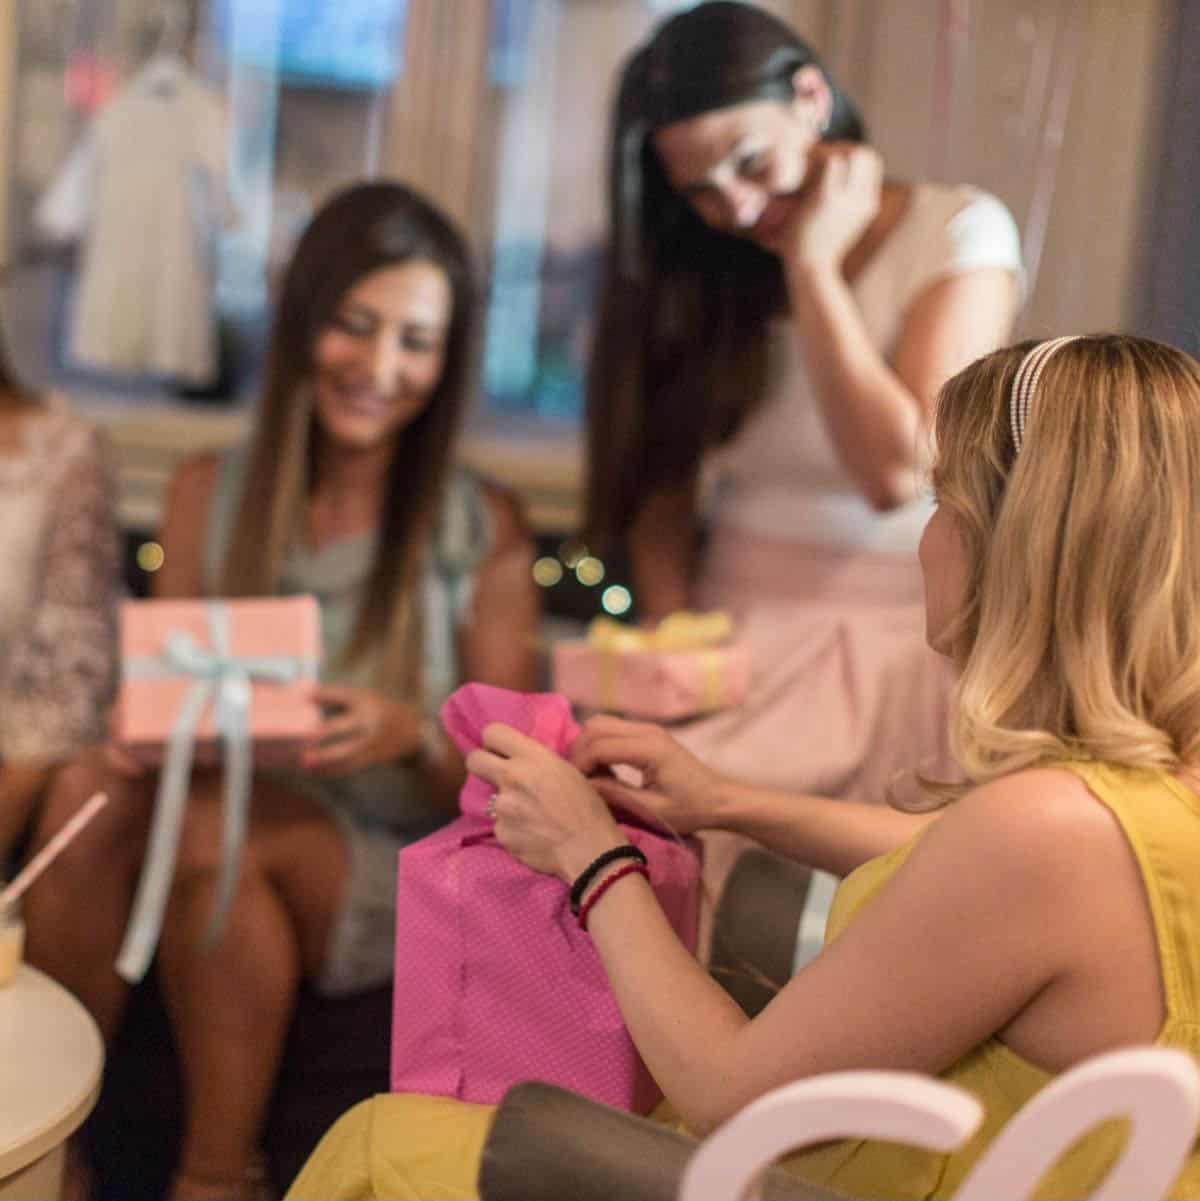 A pregnant woman in a yellow dress opens up gifts during a baby shower.